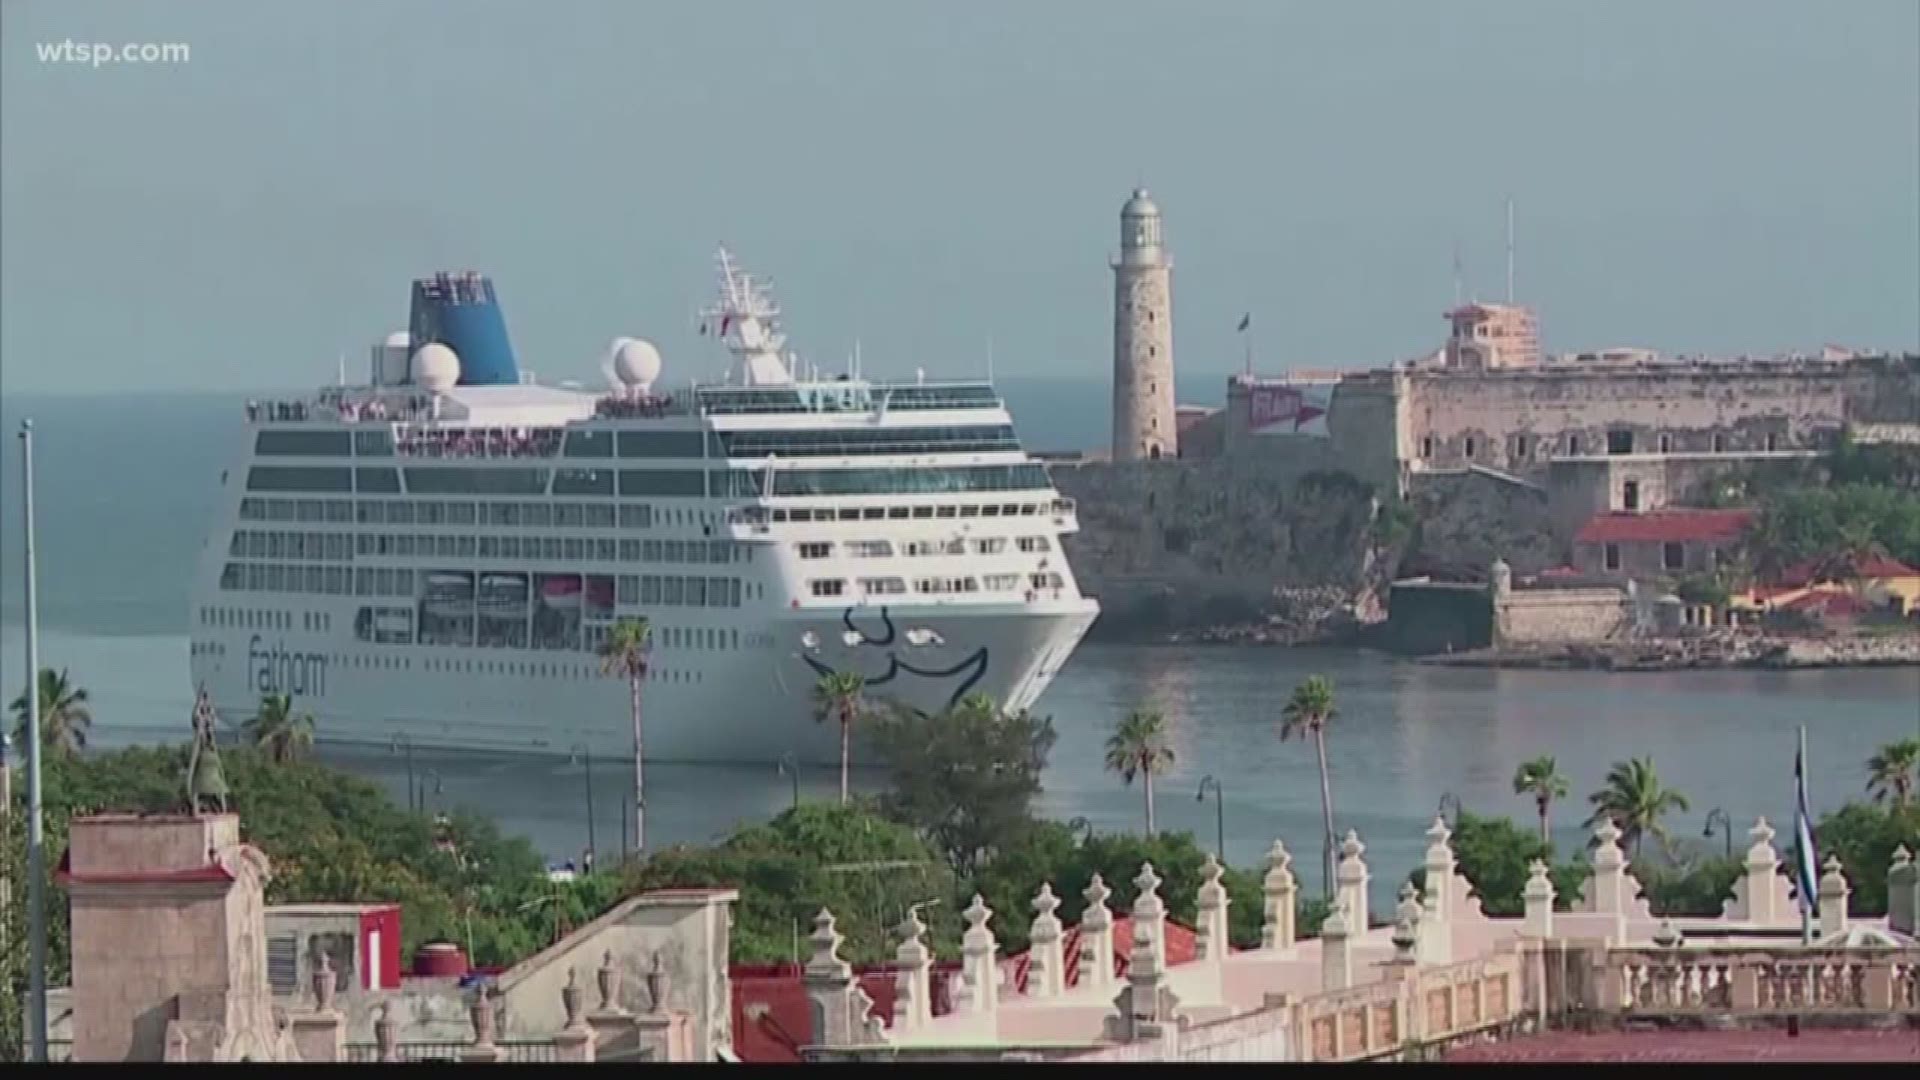 The Trump administration on Tuesday ended the most popular forms of U.S. travel to Cuba, banning cruise ships and a heavily used category of educational travel in an attempt to cut off cash to the island's communist government.

Cruise travel from the U.S. to Cuba began in May 2016 during President Barack Obama's opening with the island. It has become the most popular form of U.S. leisure travel to the island, bringing 142,721 people in the first four months of the year, a more than 300% increase over the same period last year.